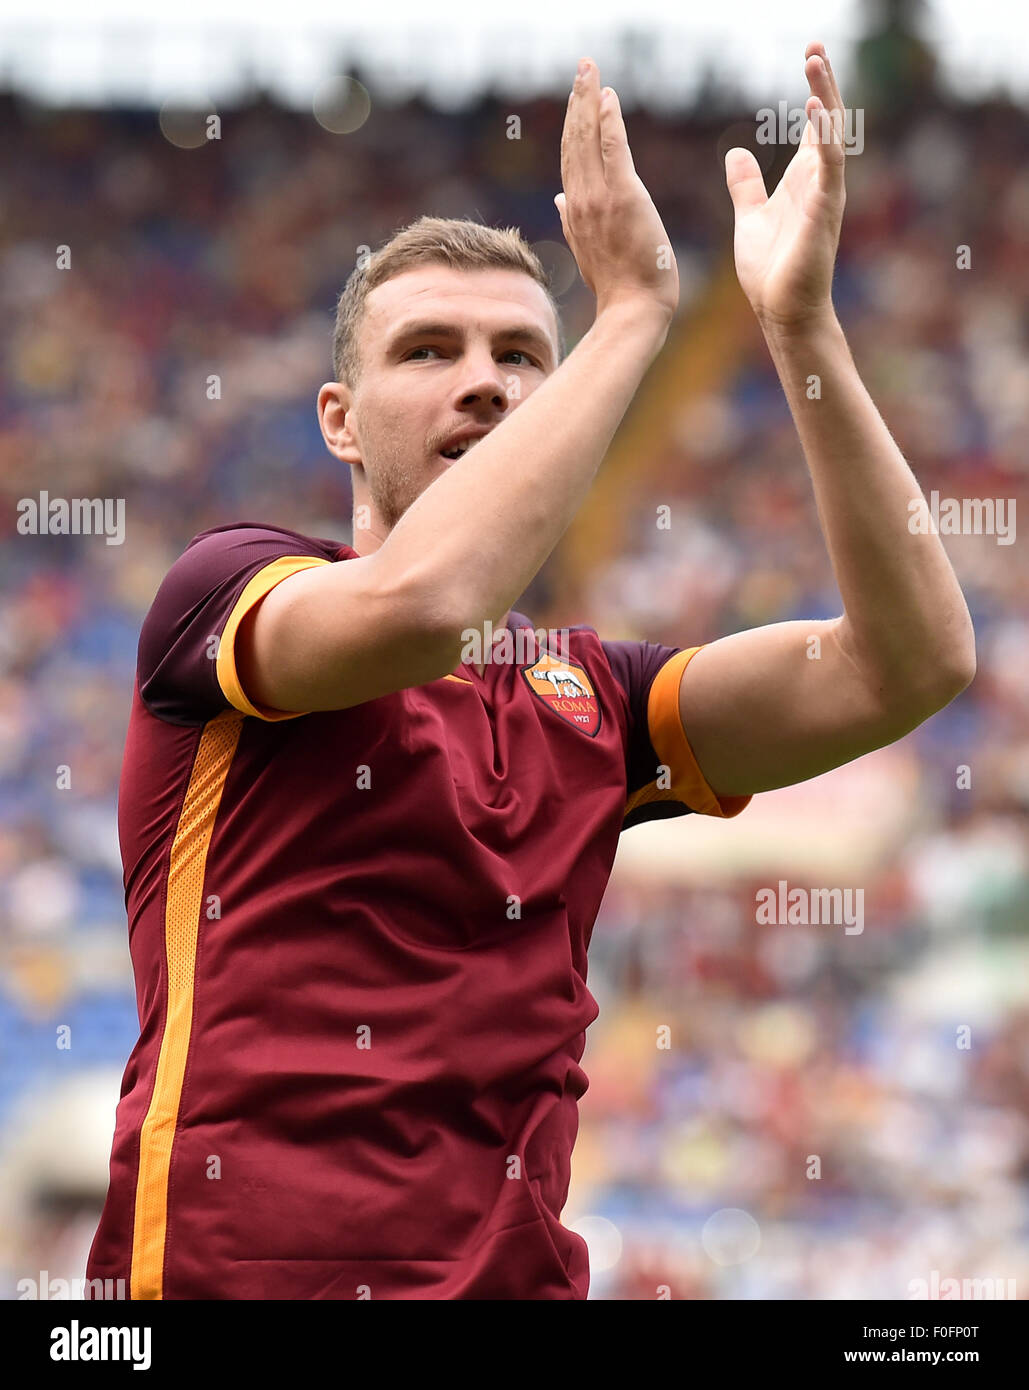 Rome, Italy. 14th Aug, 2015. Dzeko of AS Roma gestures during a friendly match against Sevilla in Rome, Italy, on Aug. 14, 2015. AS Roma won 6-4. Credit:  Alberto Lingria/Xinhua/Alamy Live News Stock Photo